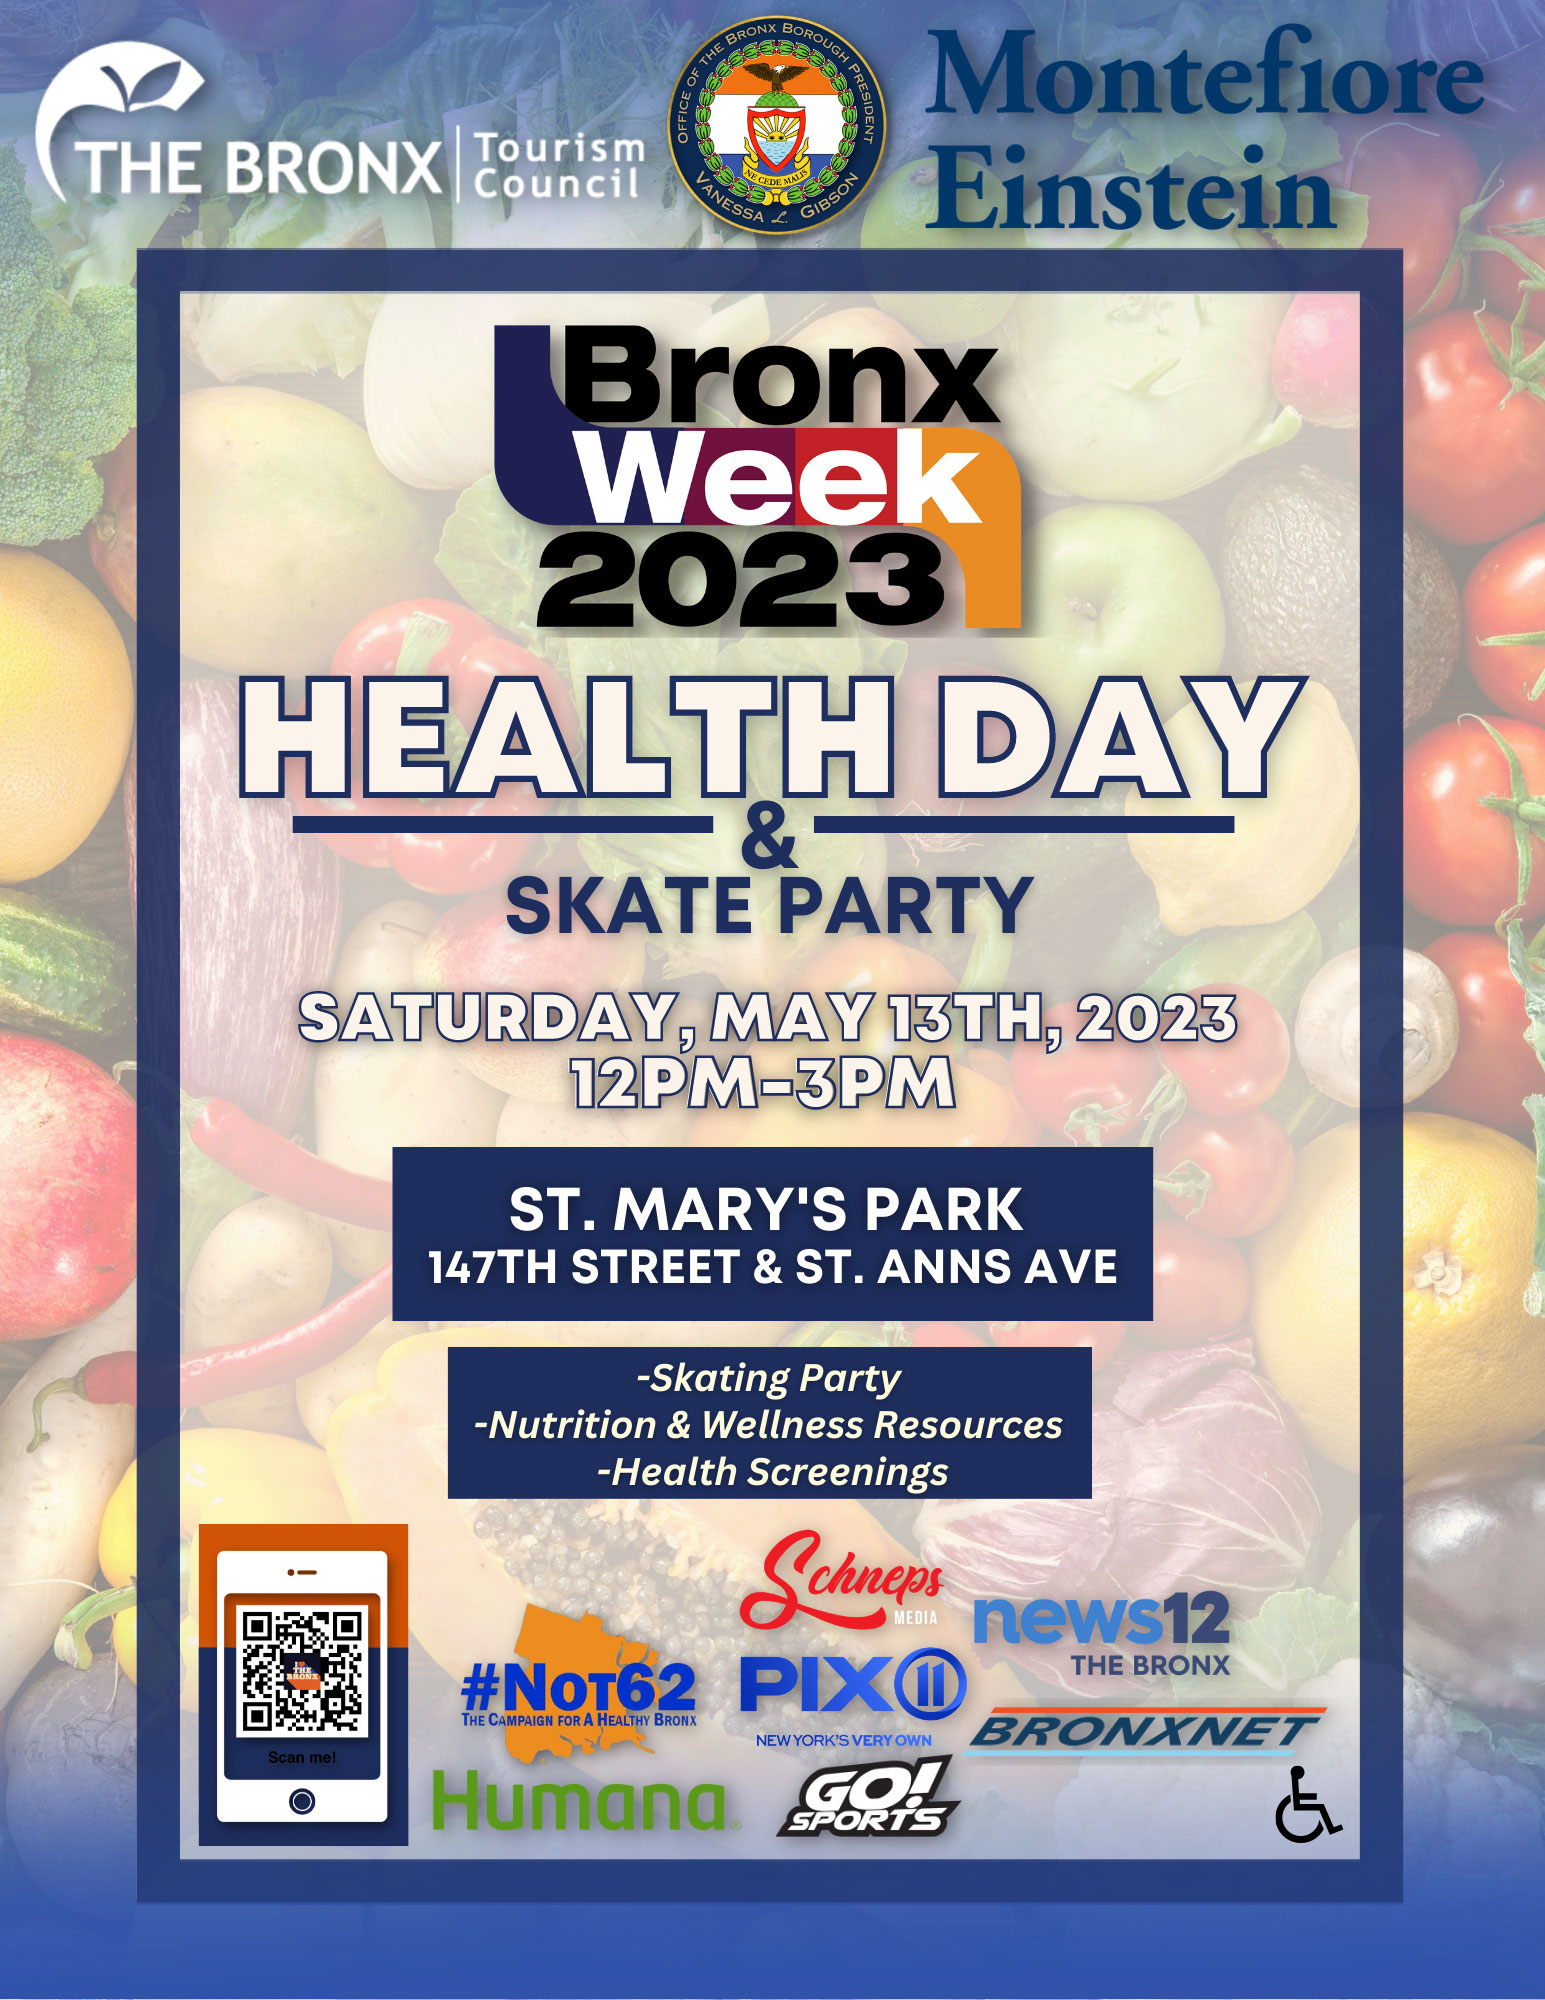 Flyer for Bronx Week Health Day & Skate Party, May 13, 2023